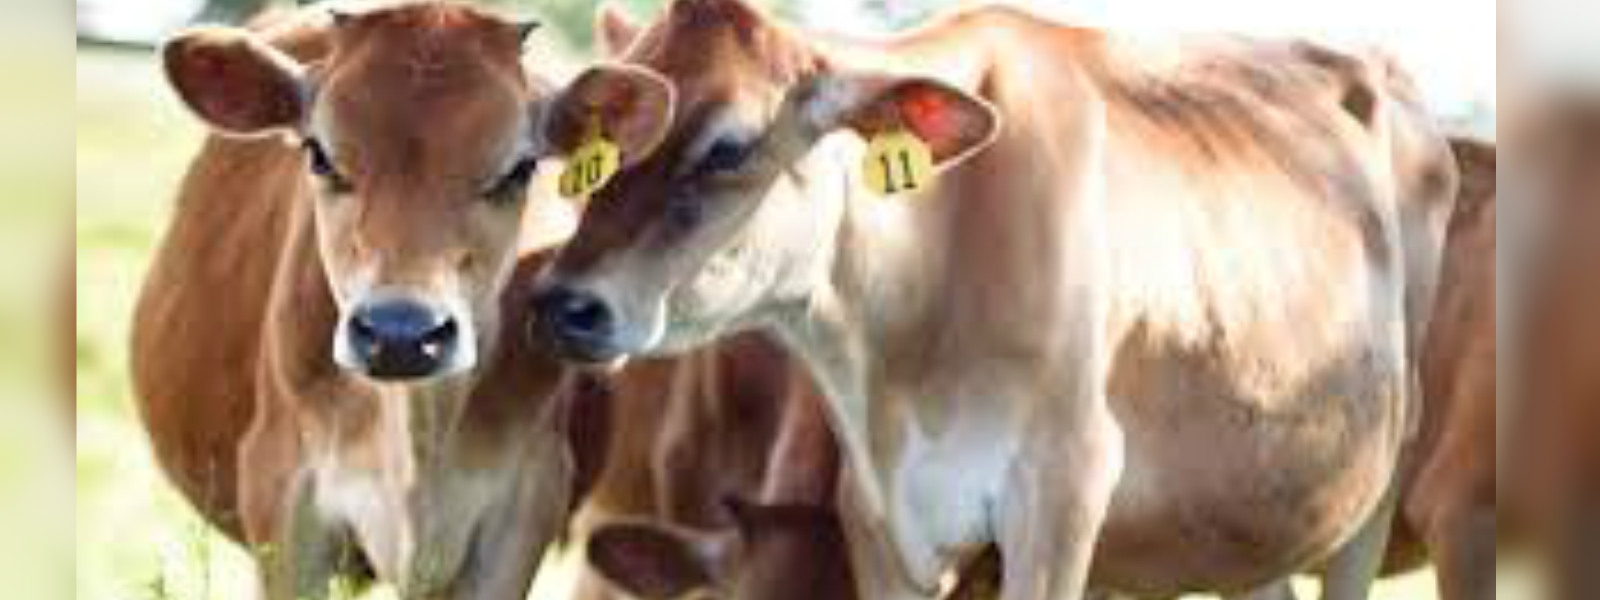 Govt to import 2,500 cows to boost milk production